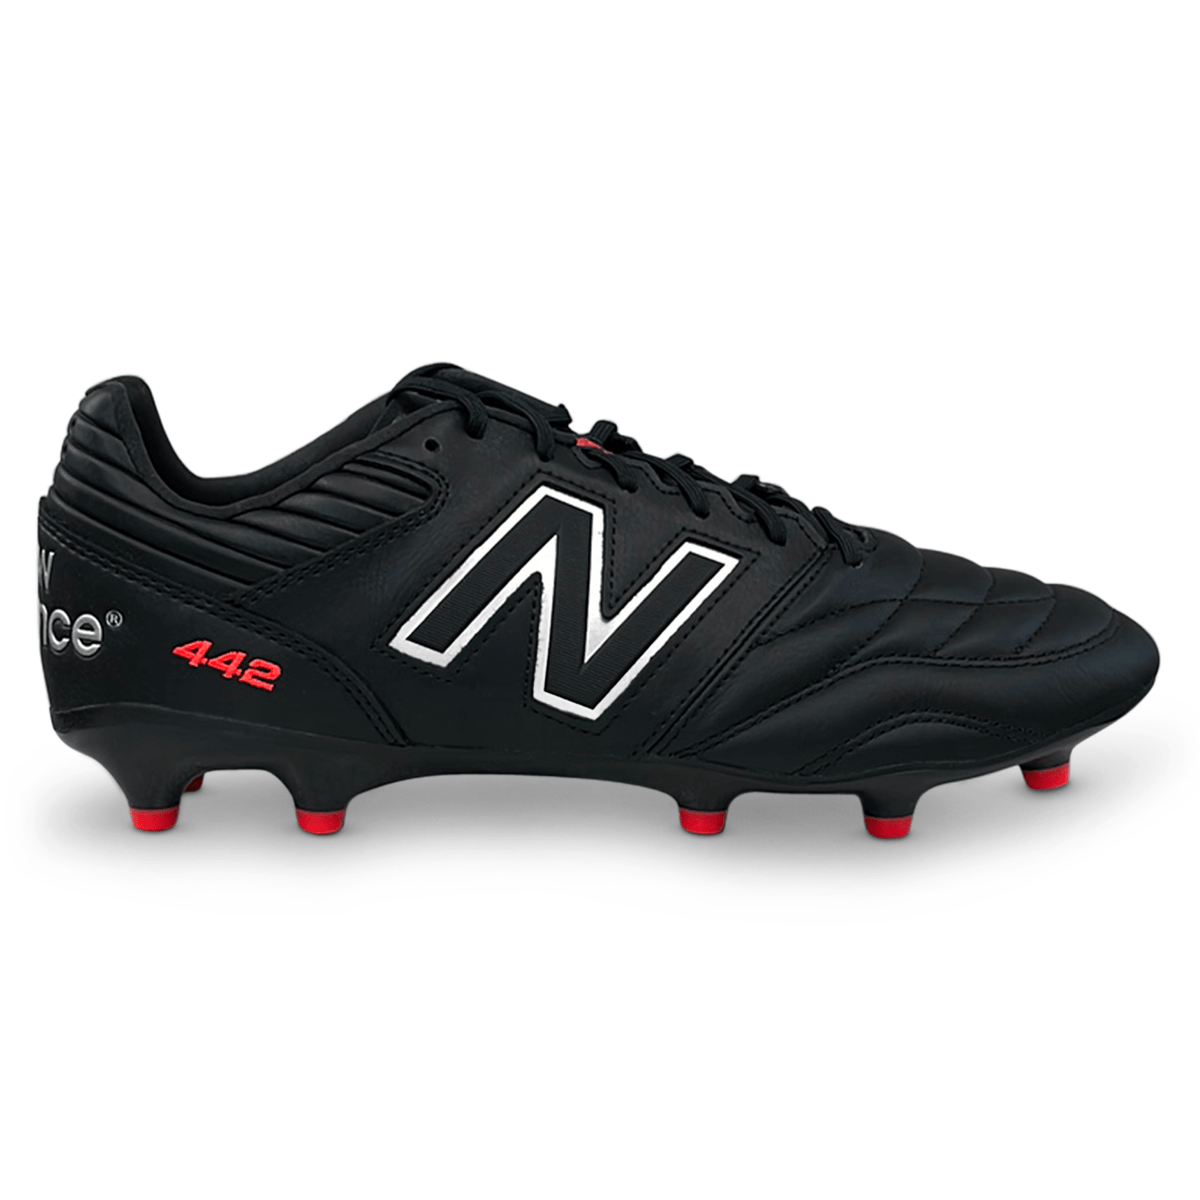 New Balance 442 V2 Pro Rugby Cleat - Firm Ground Boot - Black/Silver ...